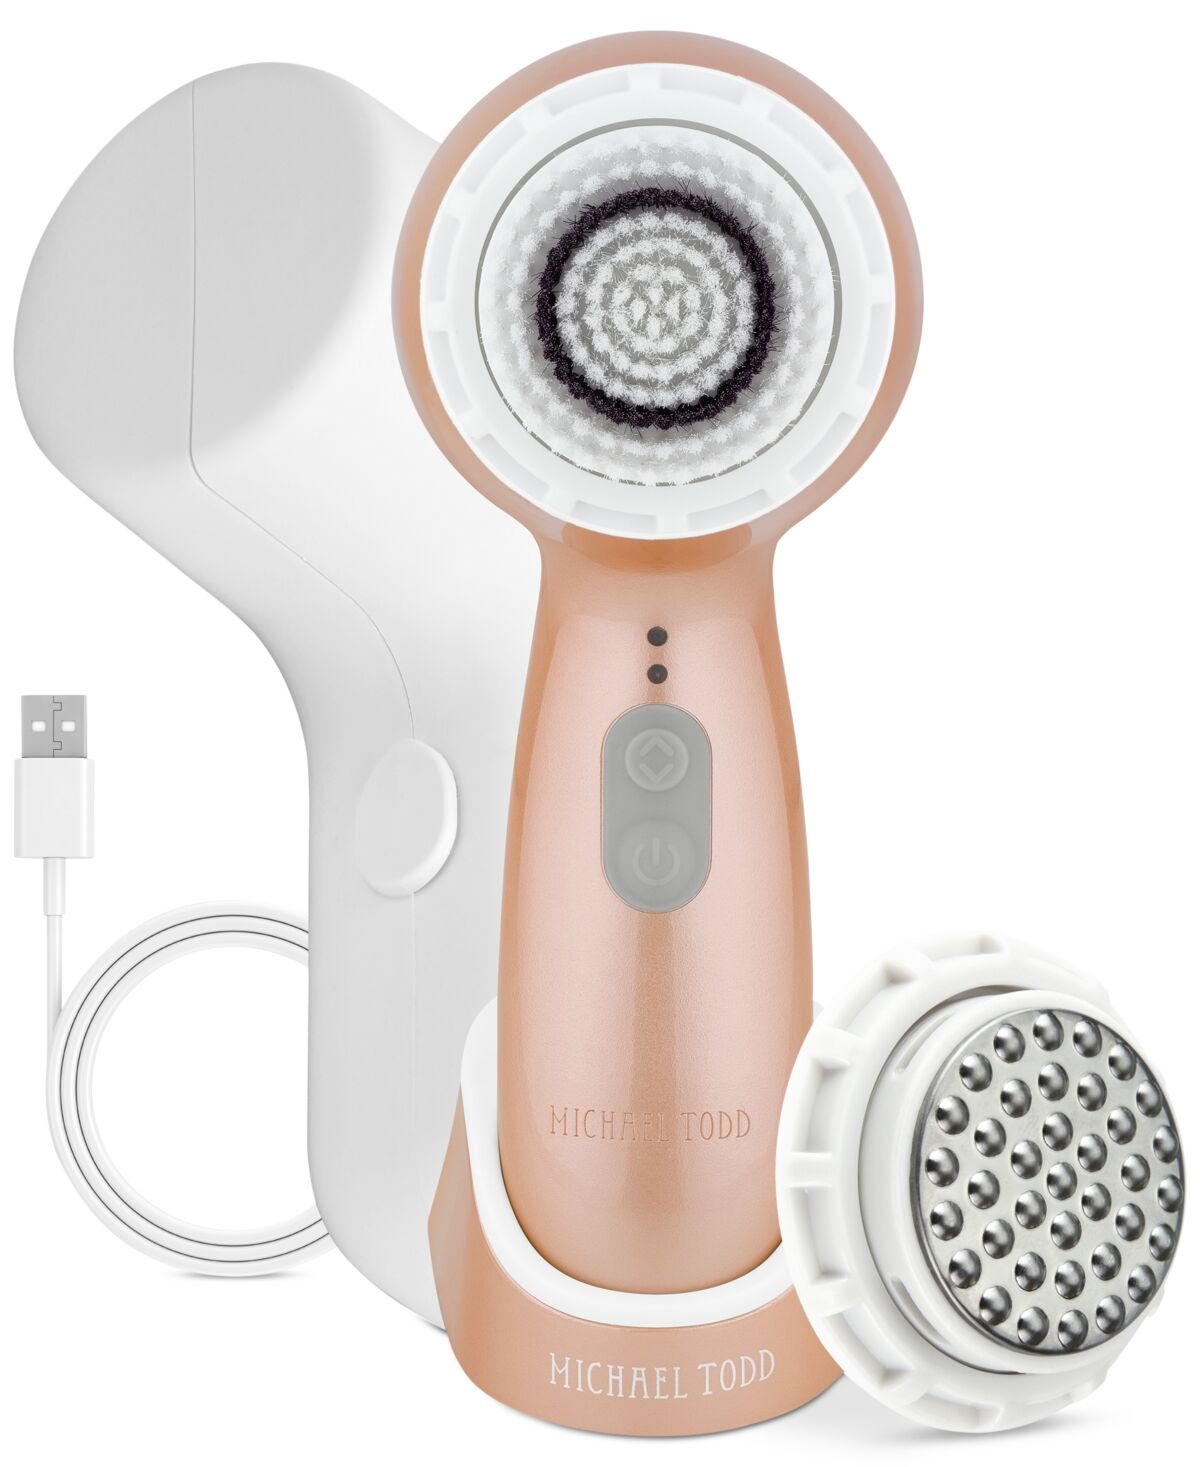 Michael Todd Beauty Soniclear Petite Antimicrobial Sonic Skin Cleansing Brush - Rose Gold